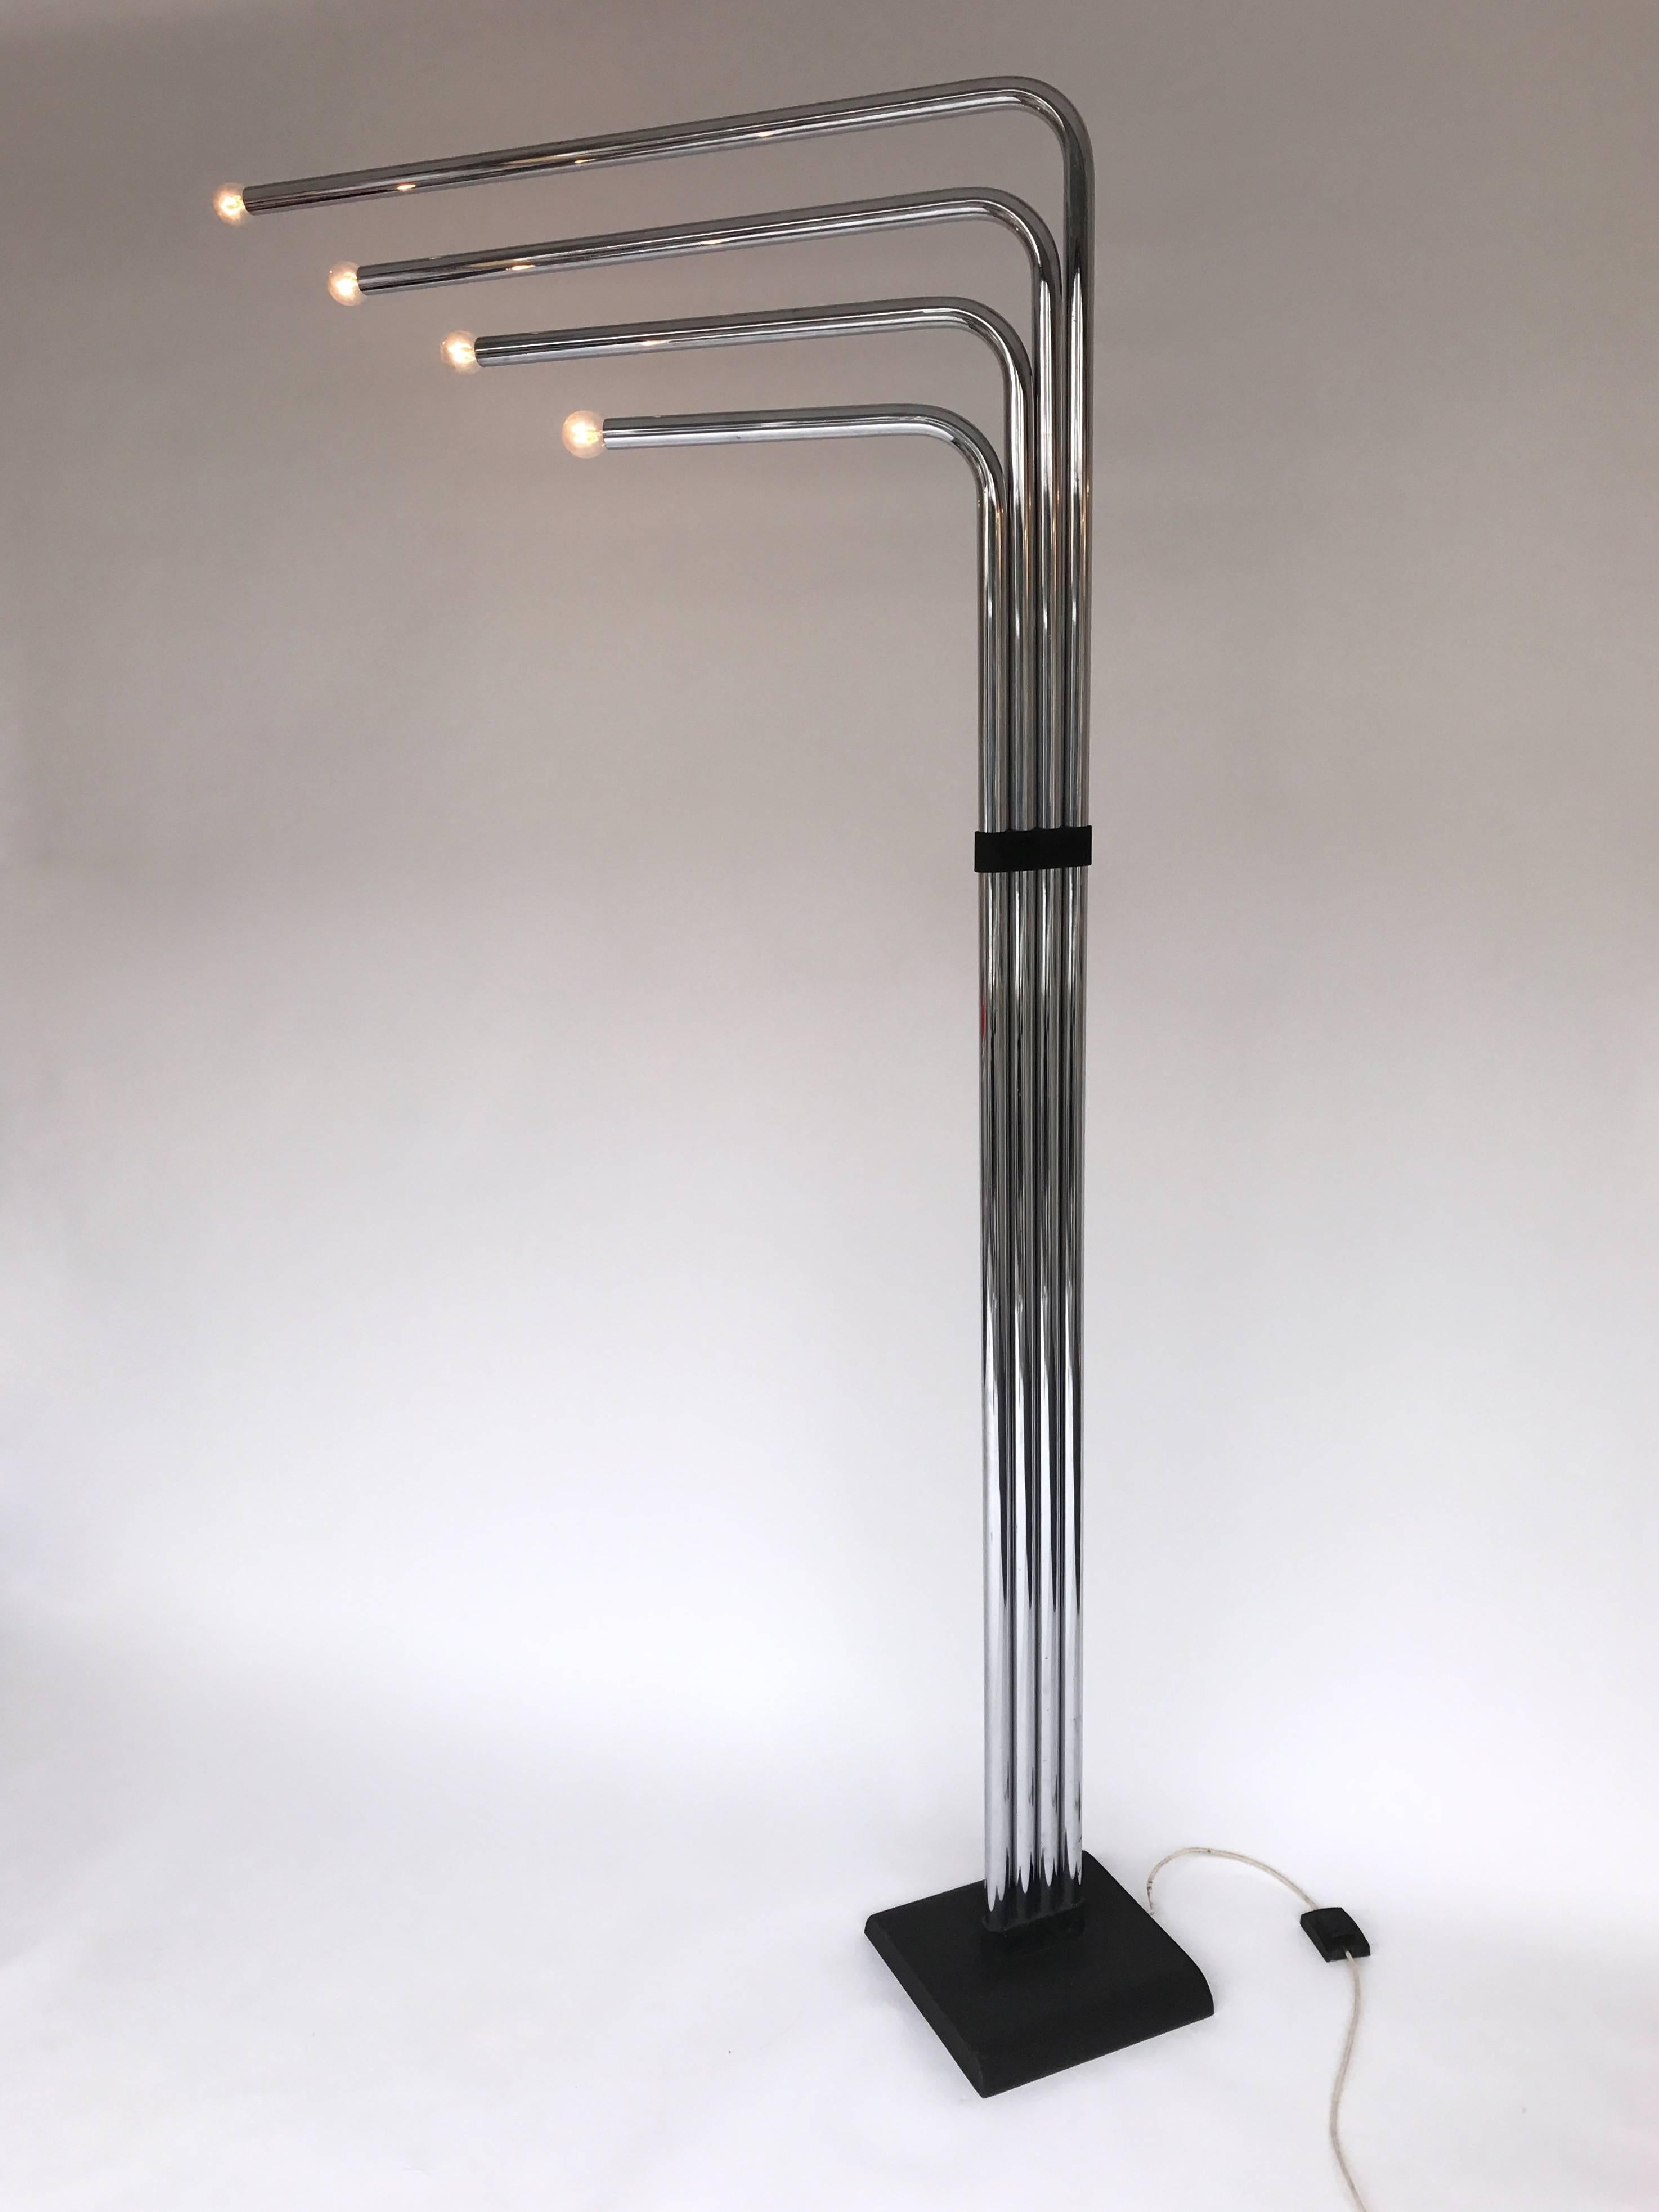 Architectural floor lamp in metal chrome by the editor Reggiani. Icon of the Italian design. The tallest lamp of the editor, four modular arms and lights, very sculptural. It’s a famous maker like Sciolari, Artemide, Stilnovo during the 1970s-1980s.